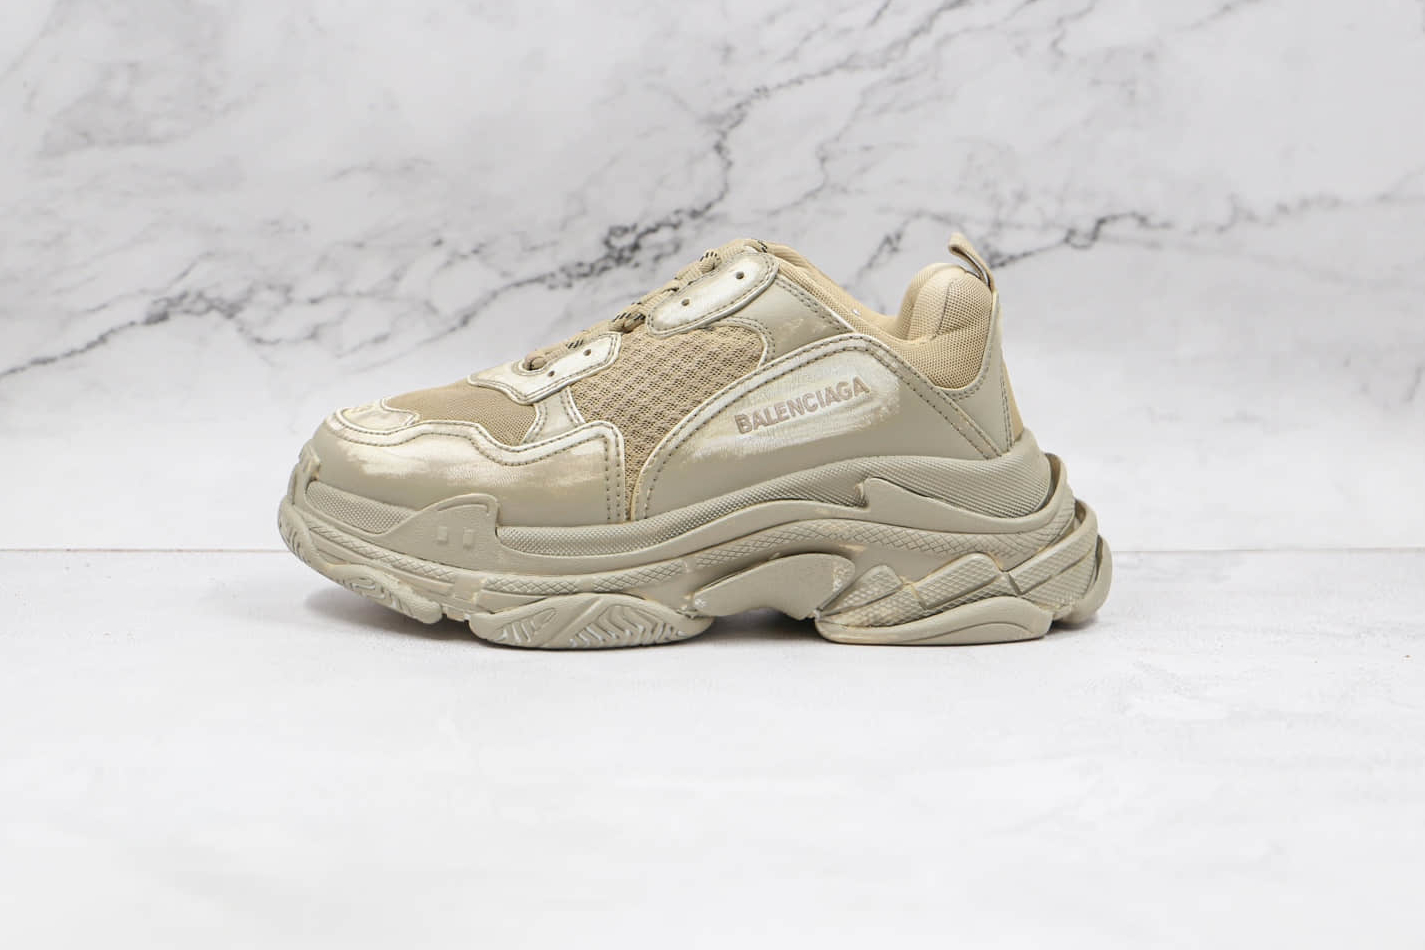 Shop the Trendy Balenciaga Triple S Sneaker 'Light Beige Faded' - Limited Edition!